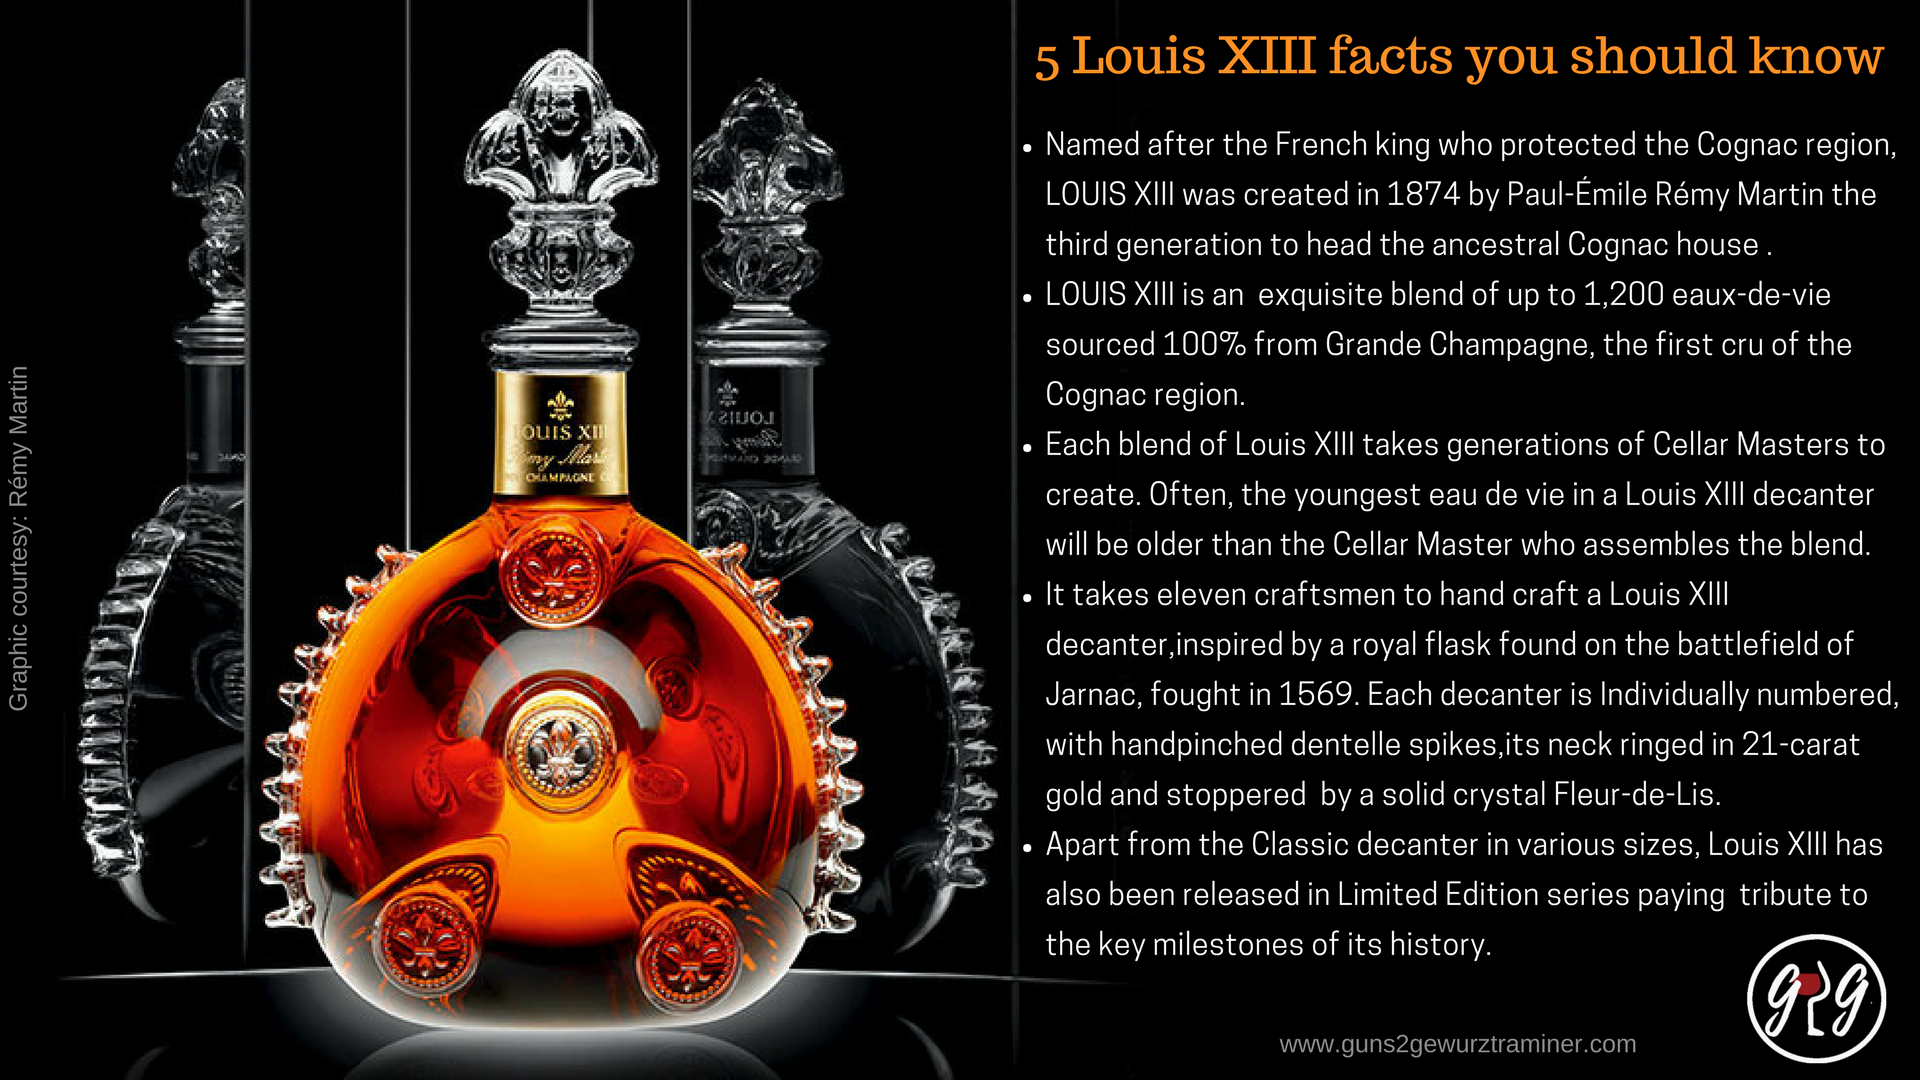 5 Louis XIII facts you should know (1)